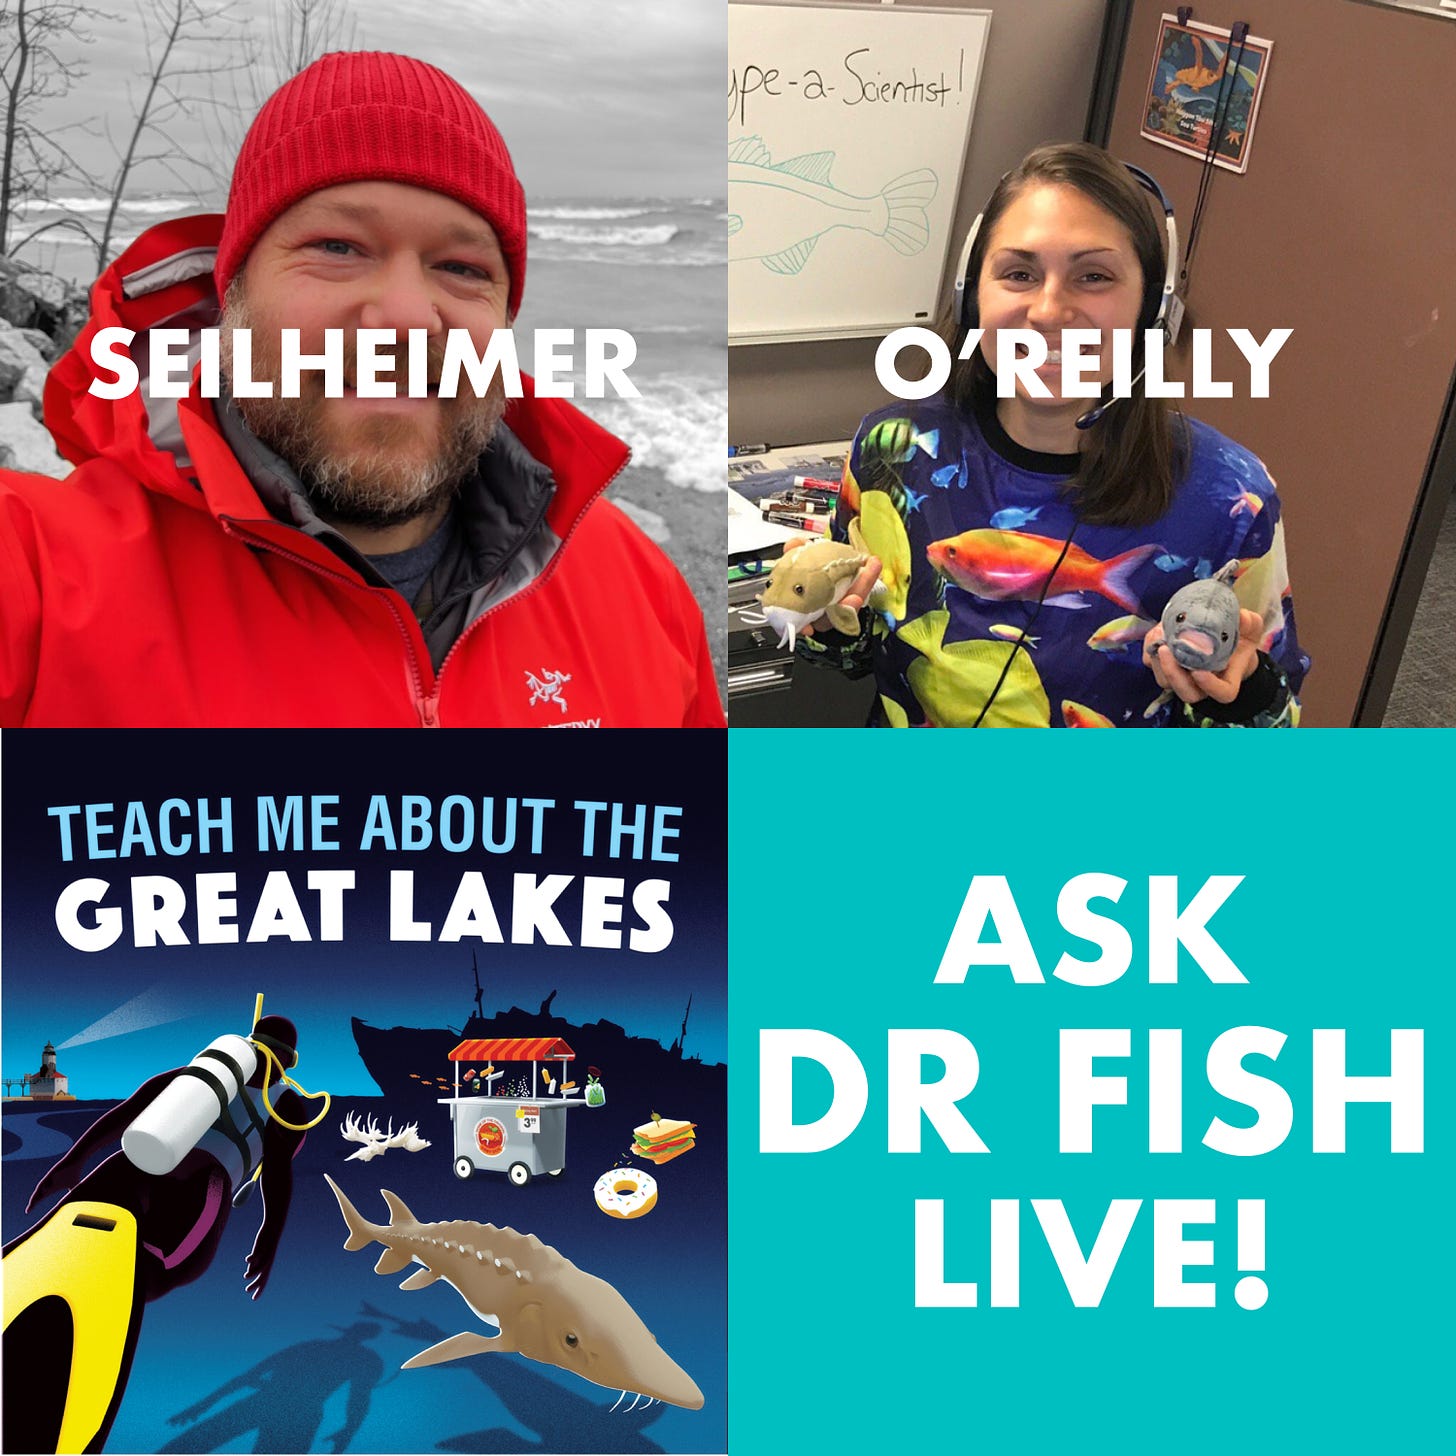 A picture of Titus Seilheimer, Katie O'Reilly, and the Teach Me About the Great Lakes artwork with the text "Ask Dr Fish Live"